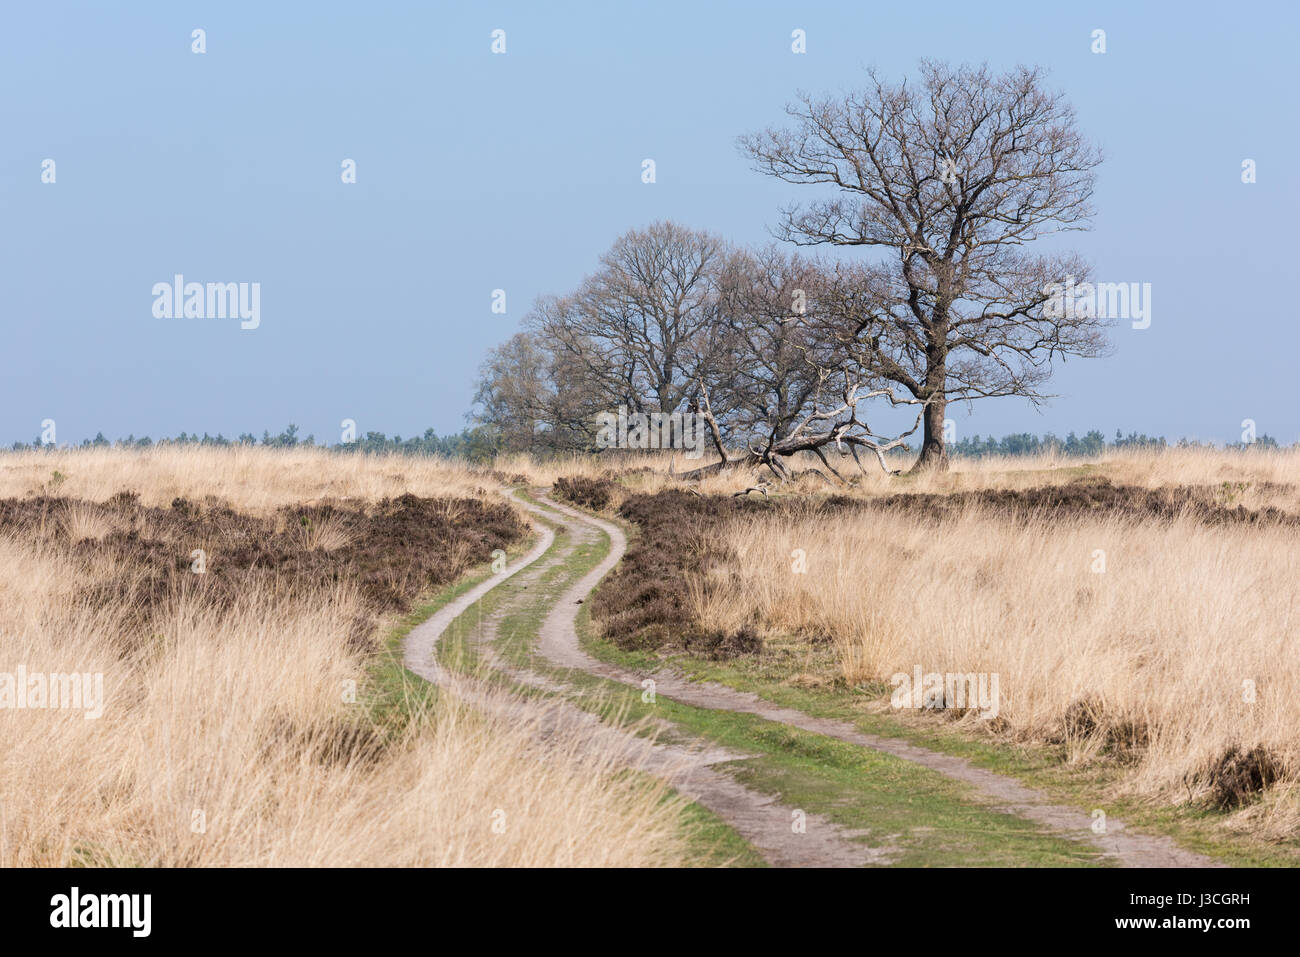 A sandy path is crossing the moor at the Deelerwoud in the Netherlands. A couple of trees are still without leaves. It is a sunny day during early spr Stock Photo